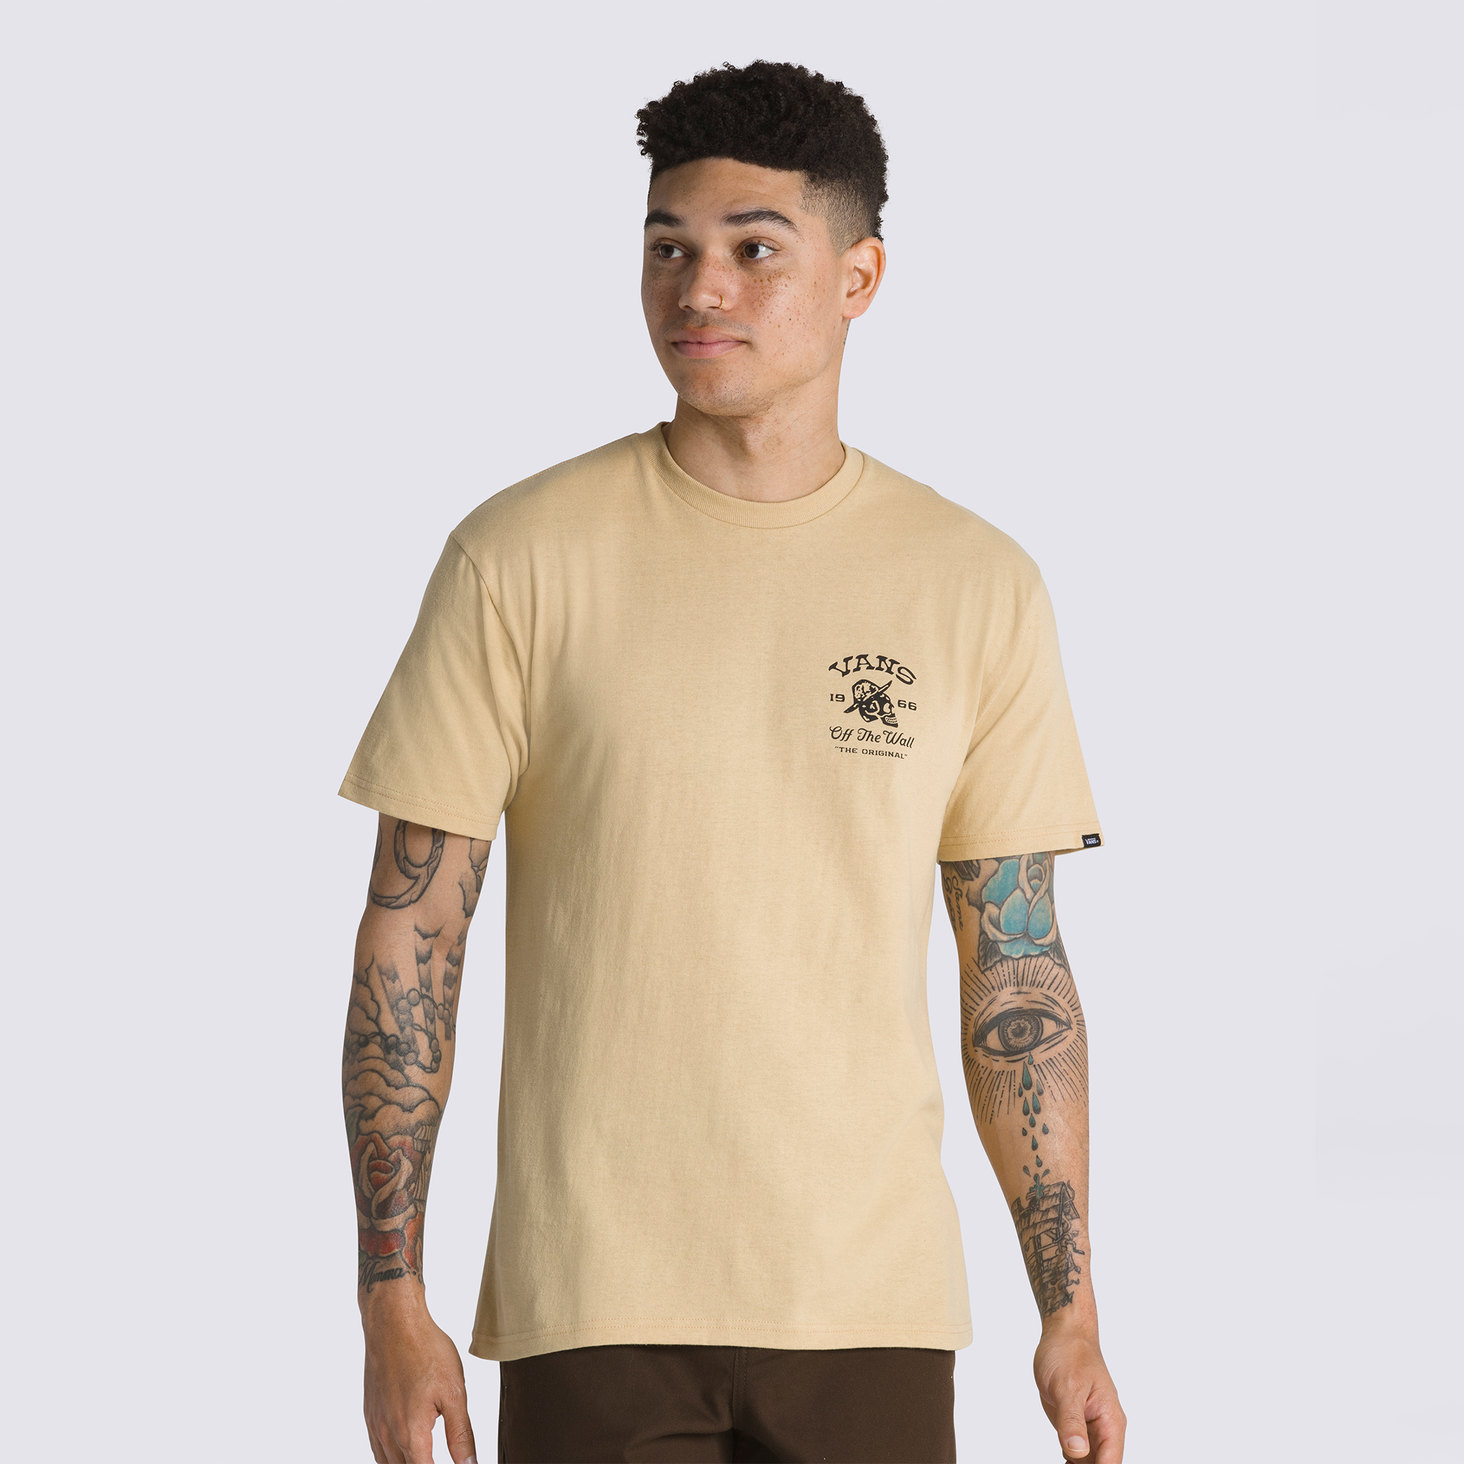 MIDDLE OF NOWHERE T-SHIRT | Vans